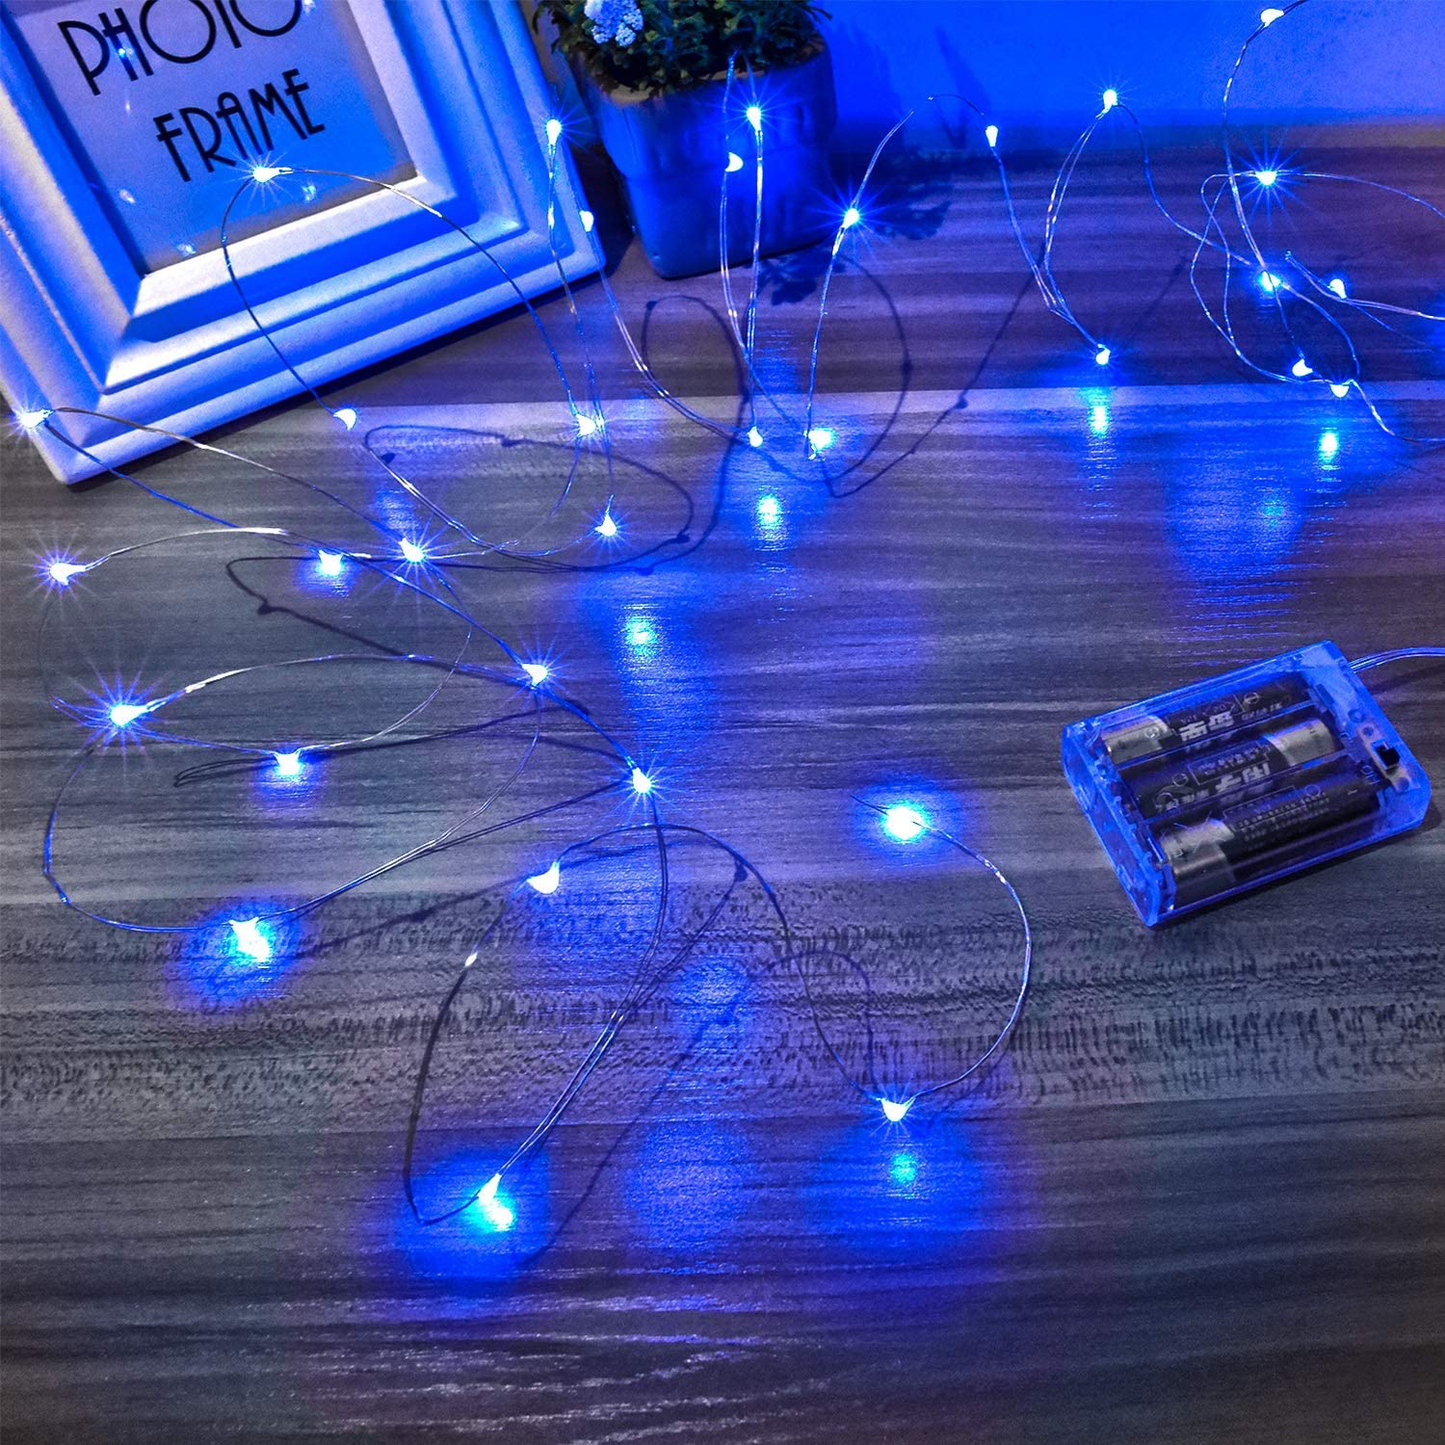 Ariceleo Led Fairy Lights Battery Operated, 2 Packs Mini Battery Powered Copper Wire Starry Fairy Lights for Bedroom, Christmas, Parties, Wedding, Centerpiece, Decoration (5m/16ft Blue)